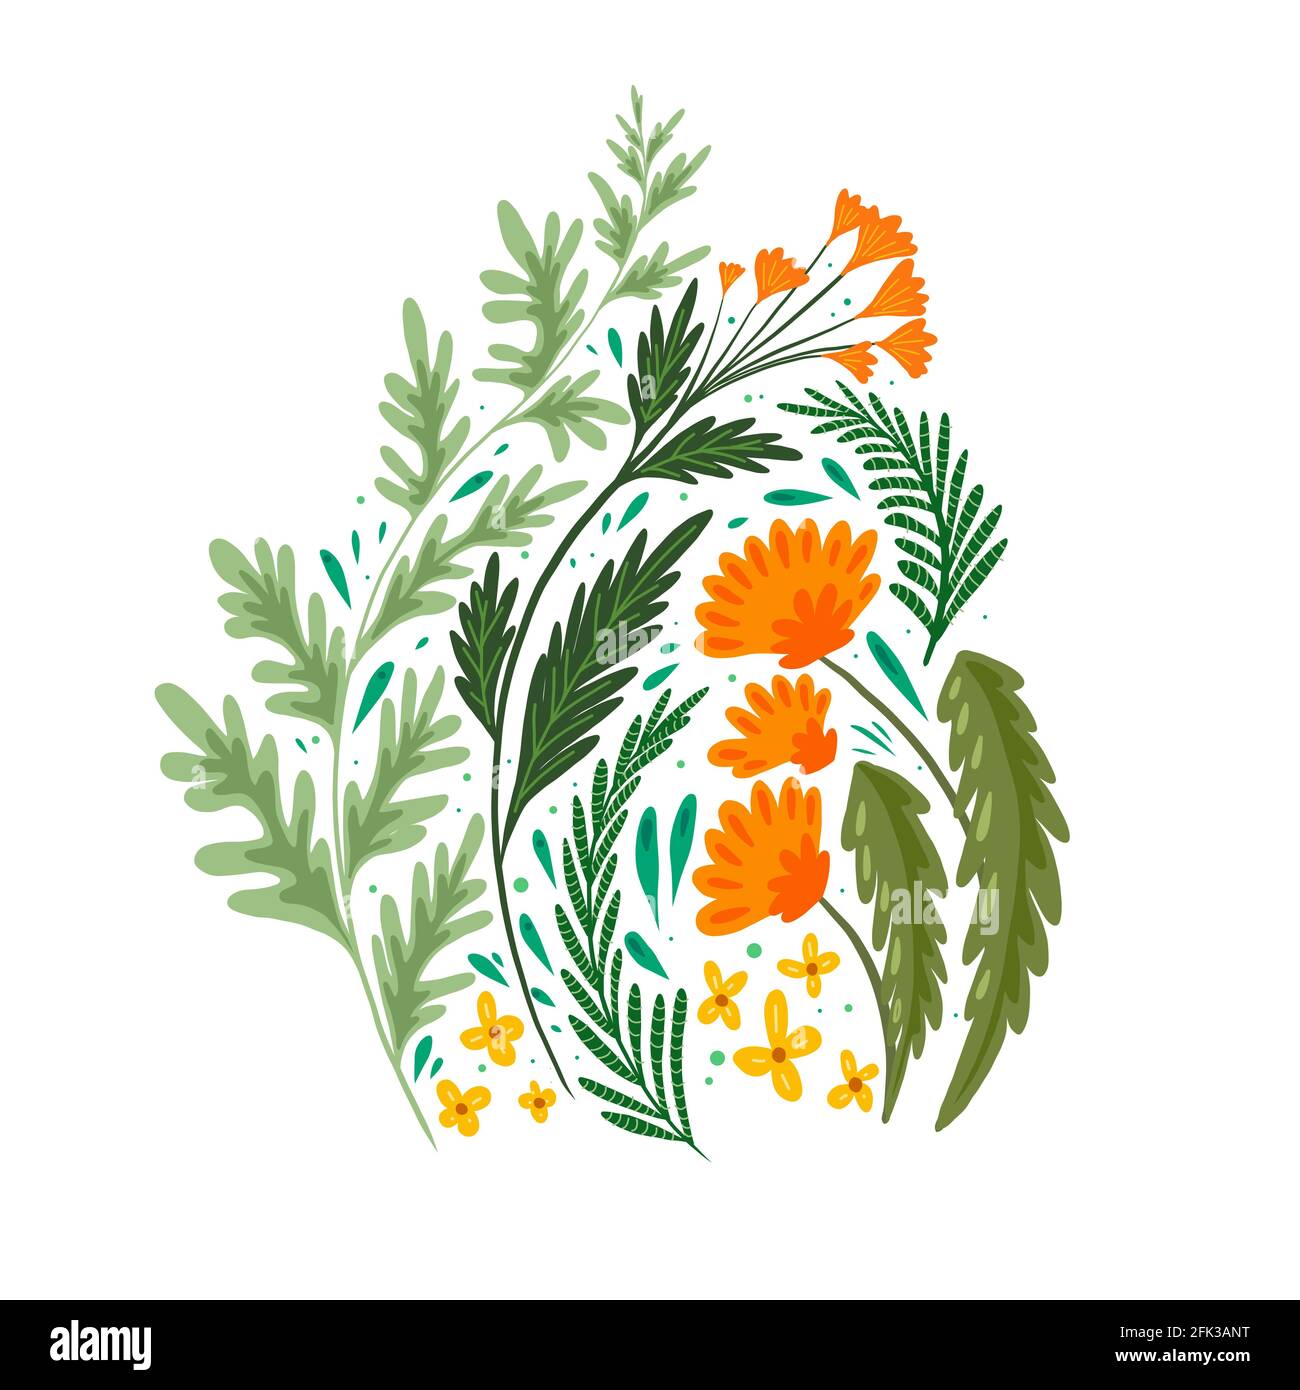 Flat illustration of grass and flower fields. A bouquet of wormwood, fennel, dandelion and St. Johns wort on white background. Vector summer and brigh Stock Vector